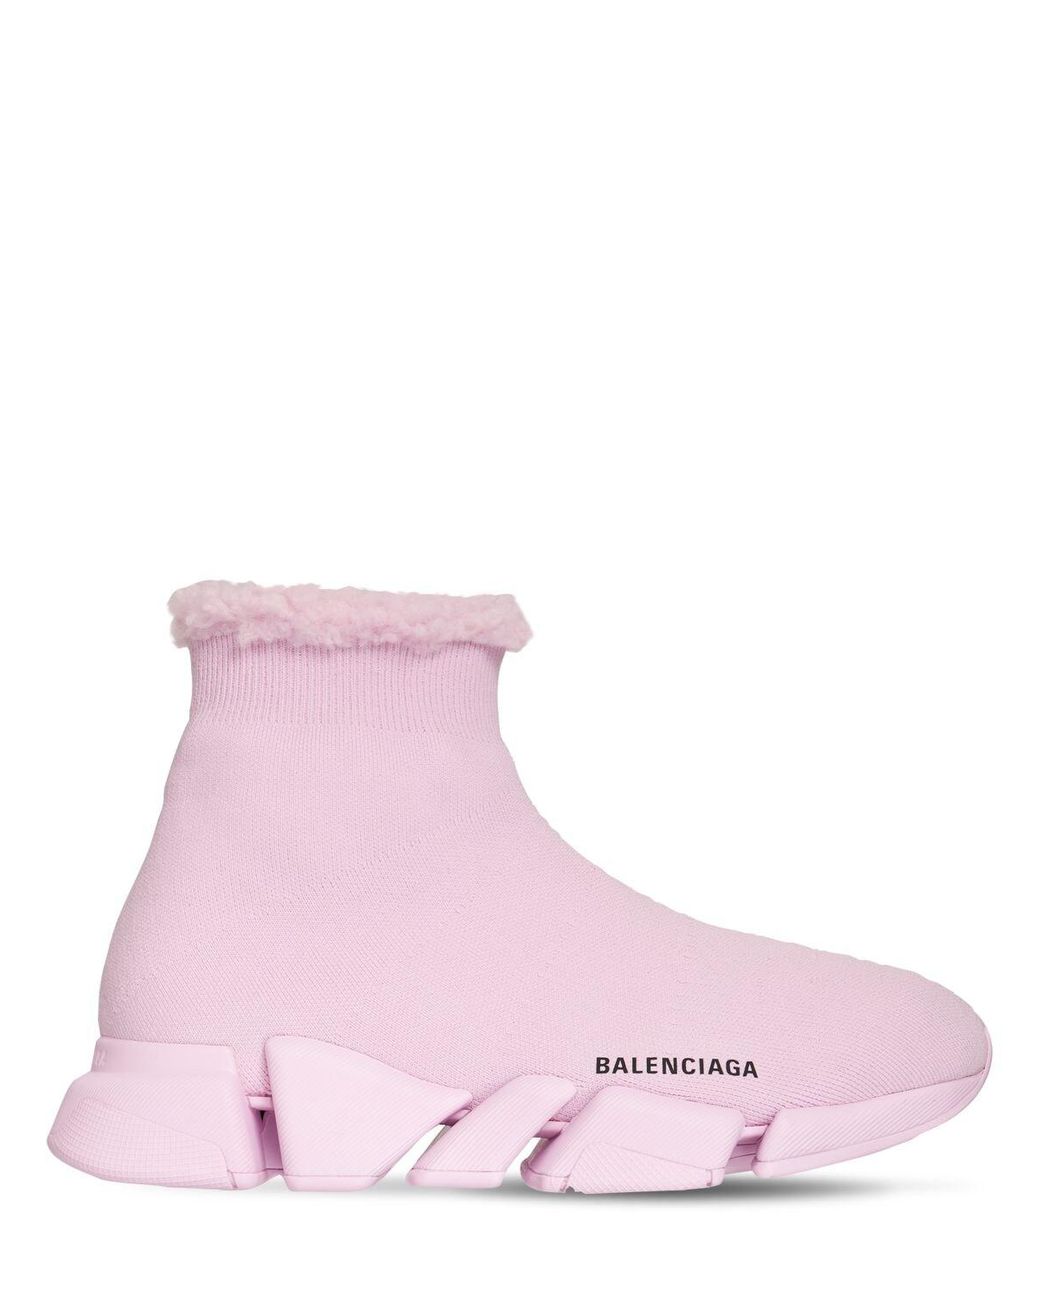 Balenciaga Speed 2.0 Recycled Faux Fur Sneakers in Pink | Lyst